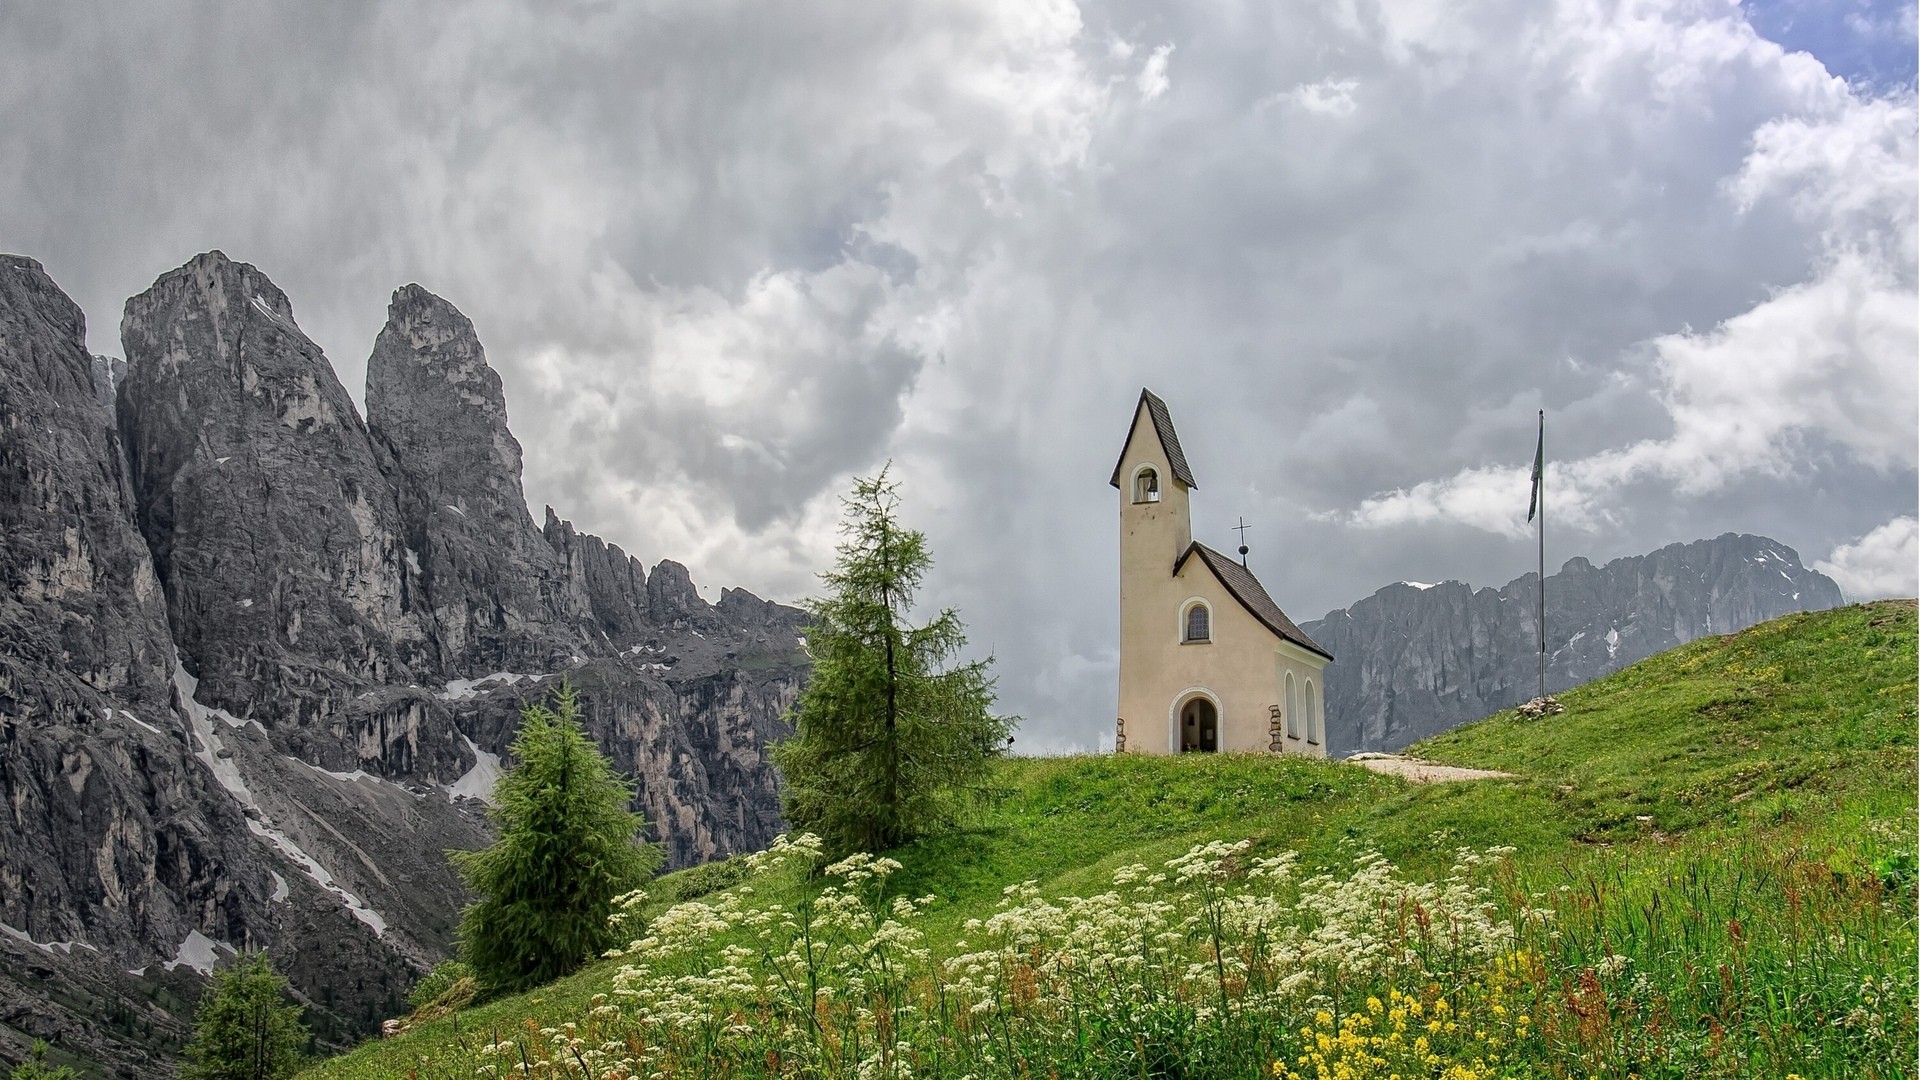 General 1920x1080 nature landscape mountains trees Dolomites church field snow rocks clouds flowers